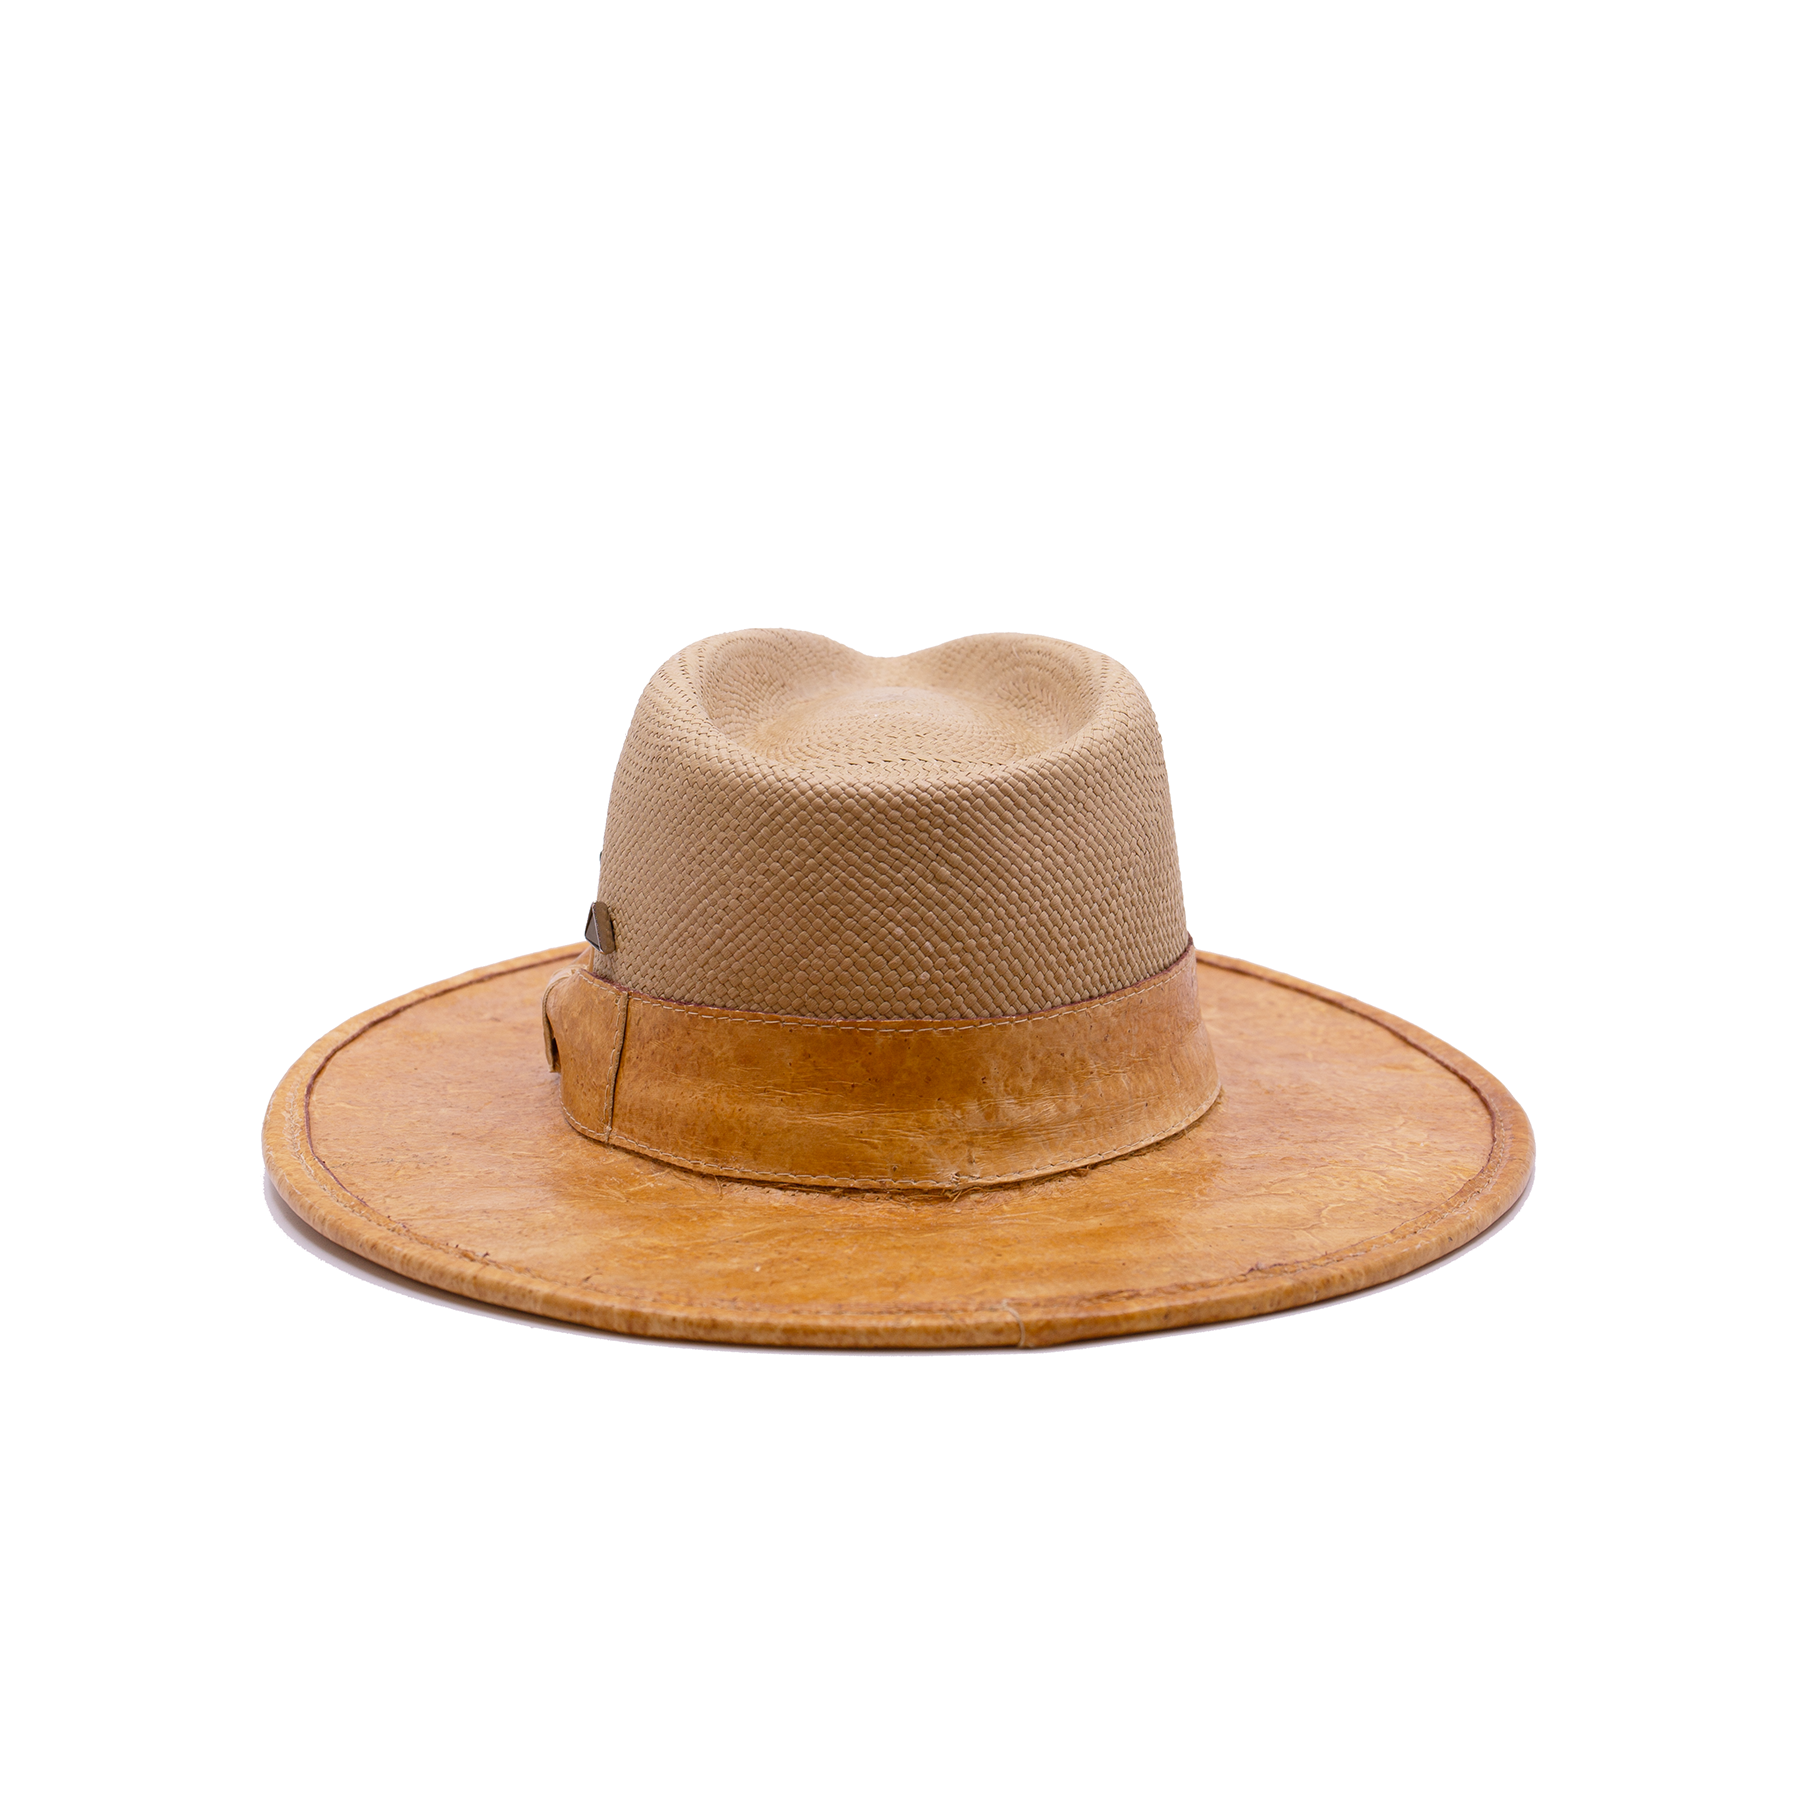 100% Straw Hat in Natural  Ecuadorian Straw Crown  1 1/2" Reishi™ band and bow MycoWorks Fine Mycelium™ leather alternative   NF silver casted gemstone on crown  Reishi™  brim and full binding   Flat brim  Woven in Ecuador  Made in California